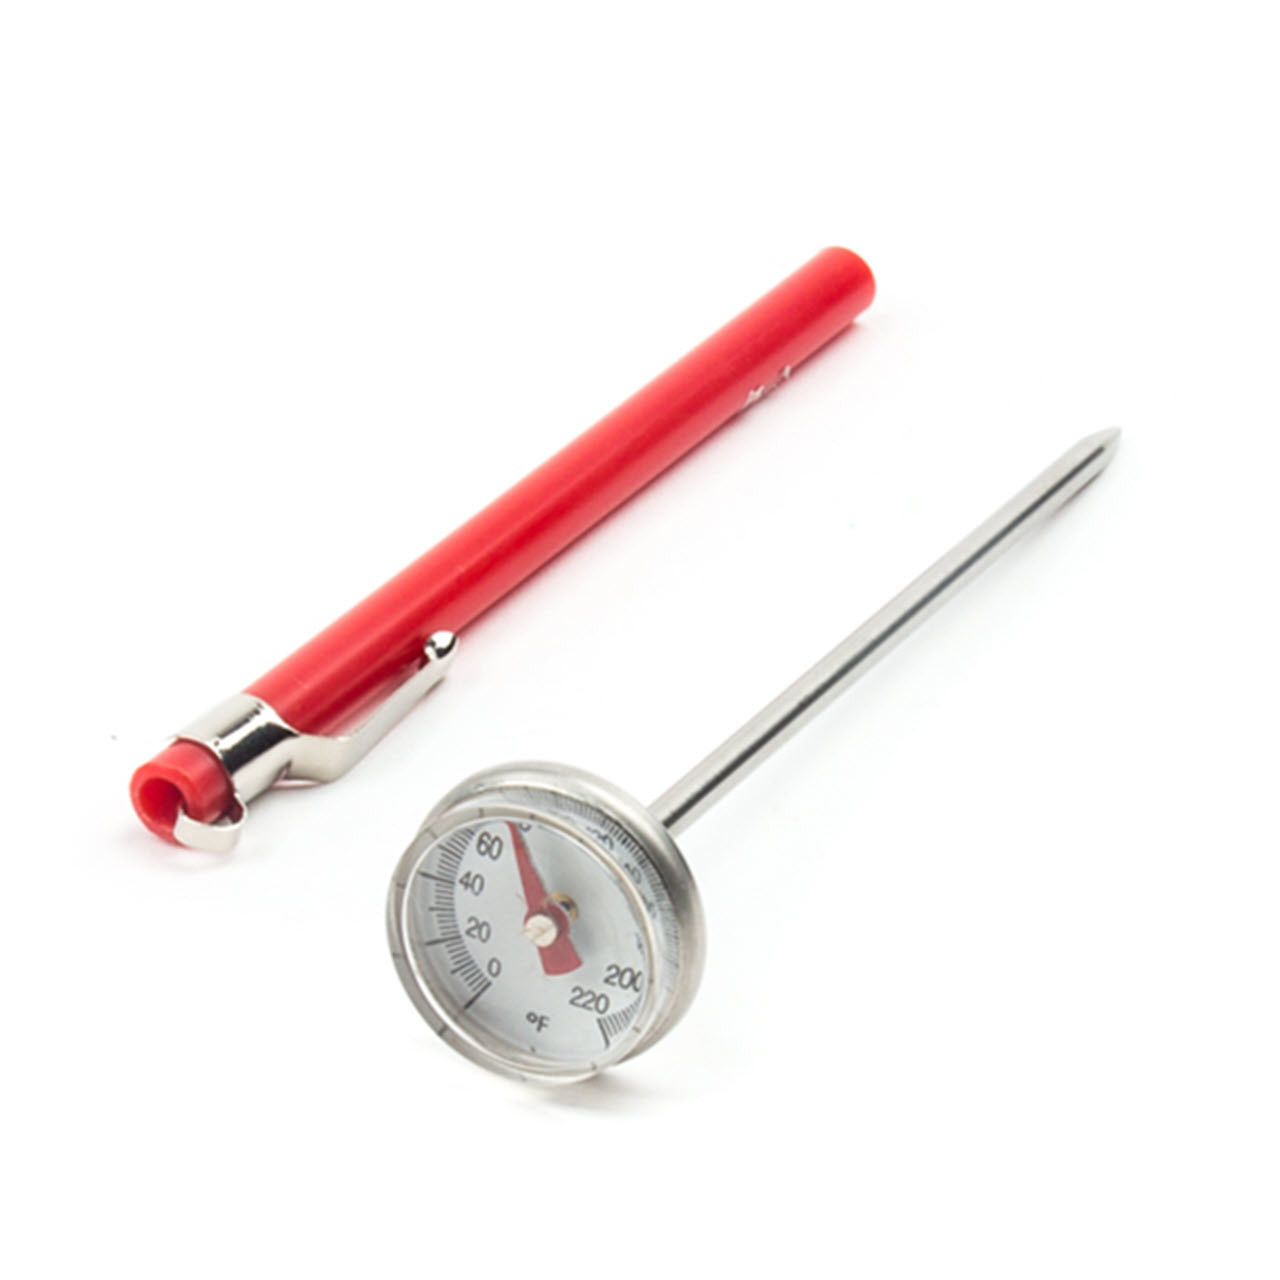 How to Use an Instant Read Thermometer?